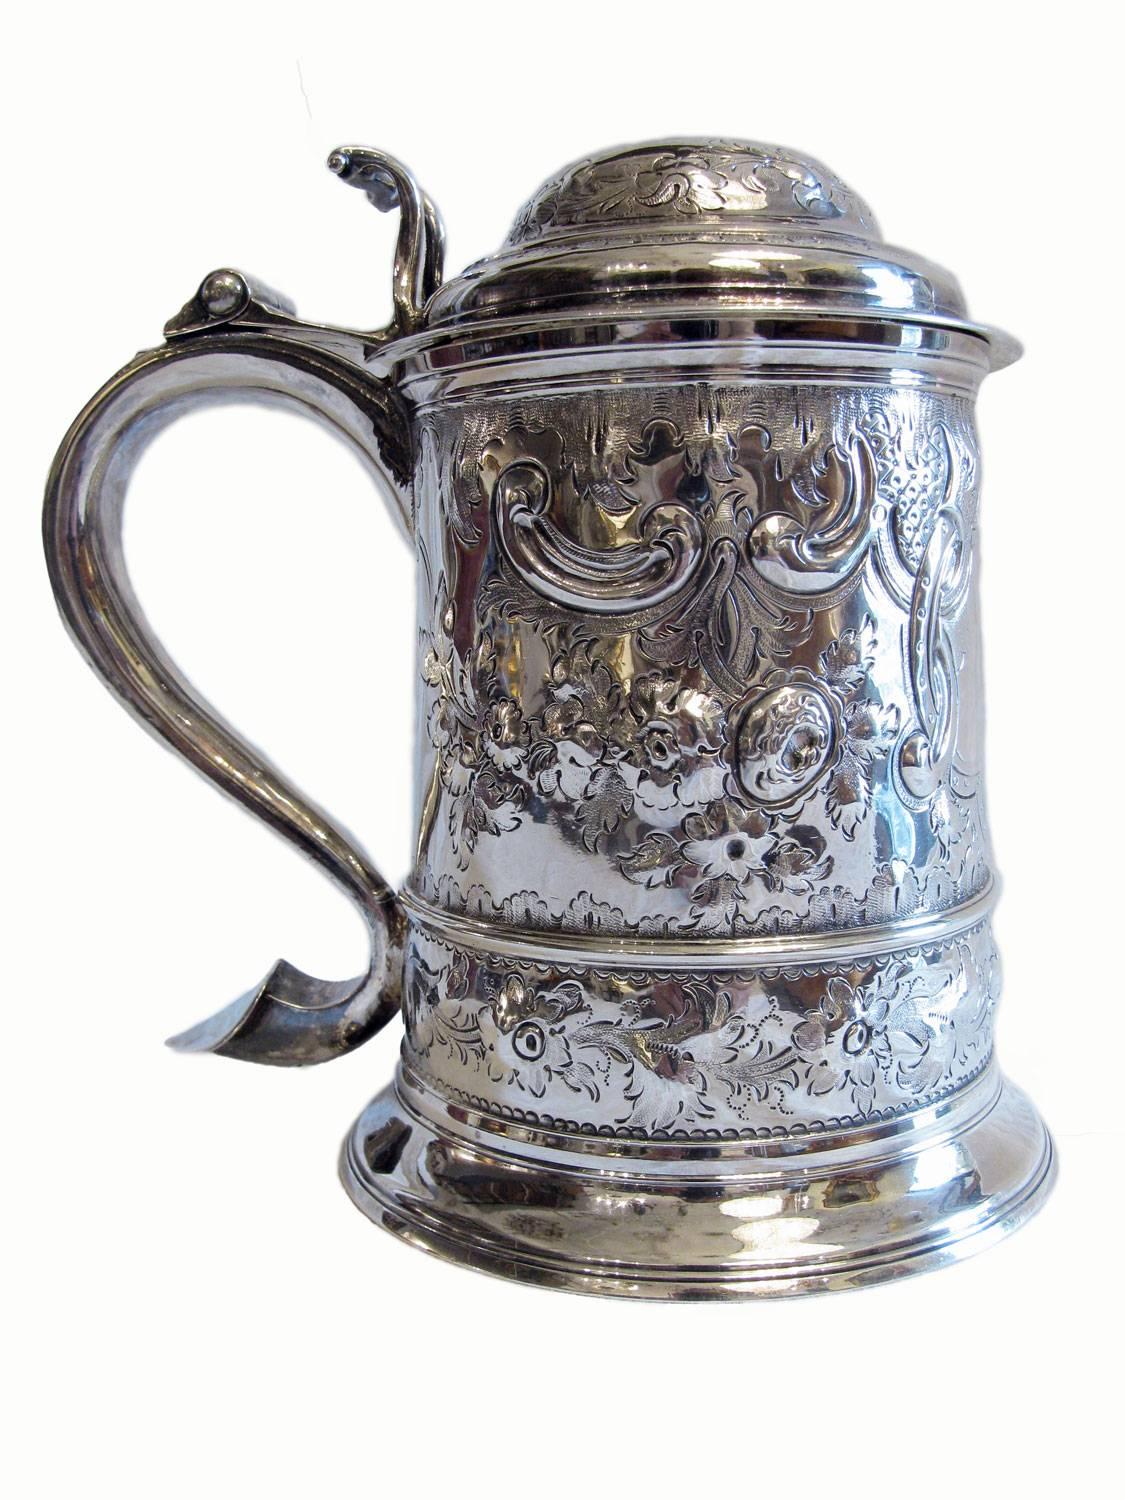 A decorative George III sterling silver lidded tankard with handle dating back to 1772-1773. Beautiful deep chased decoration to the body of flowers, foliage and scrolls. To the front there is a vacant cartouche. Gilt interior. As per images